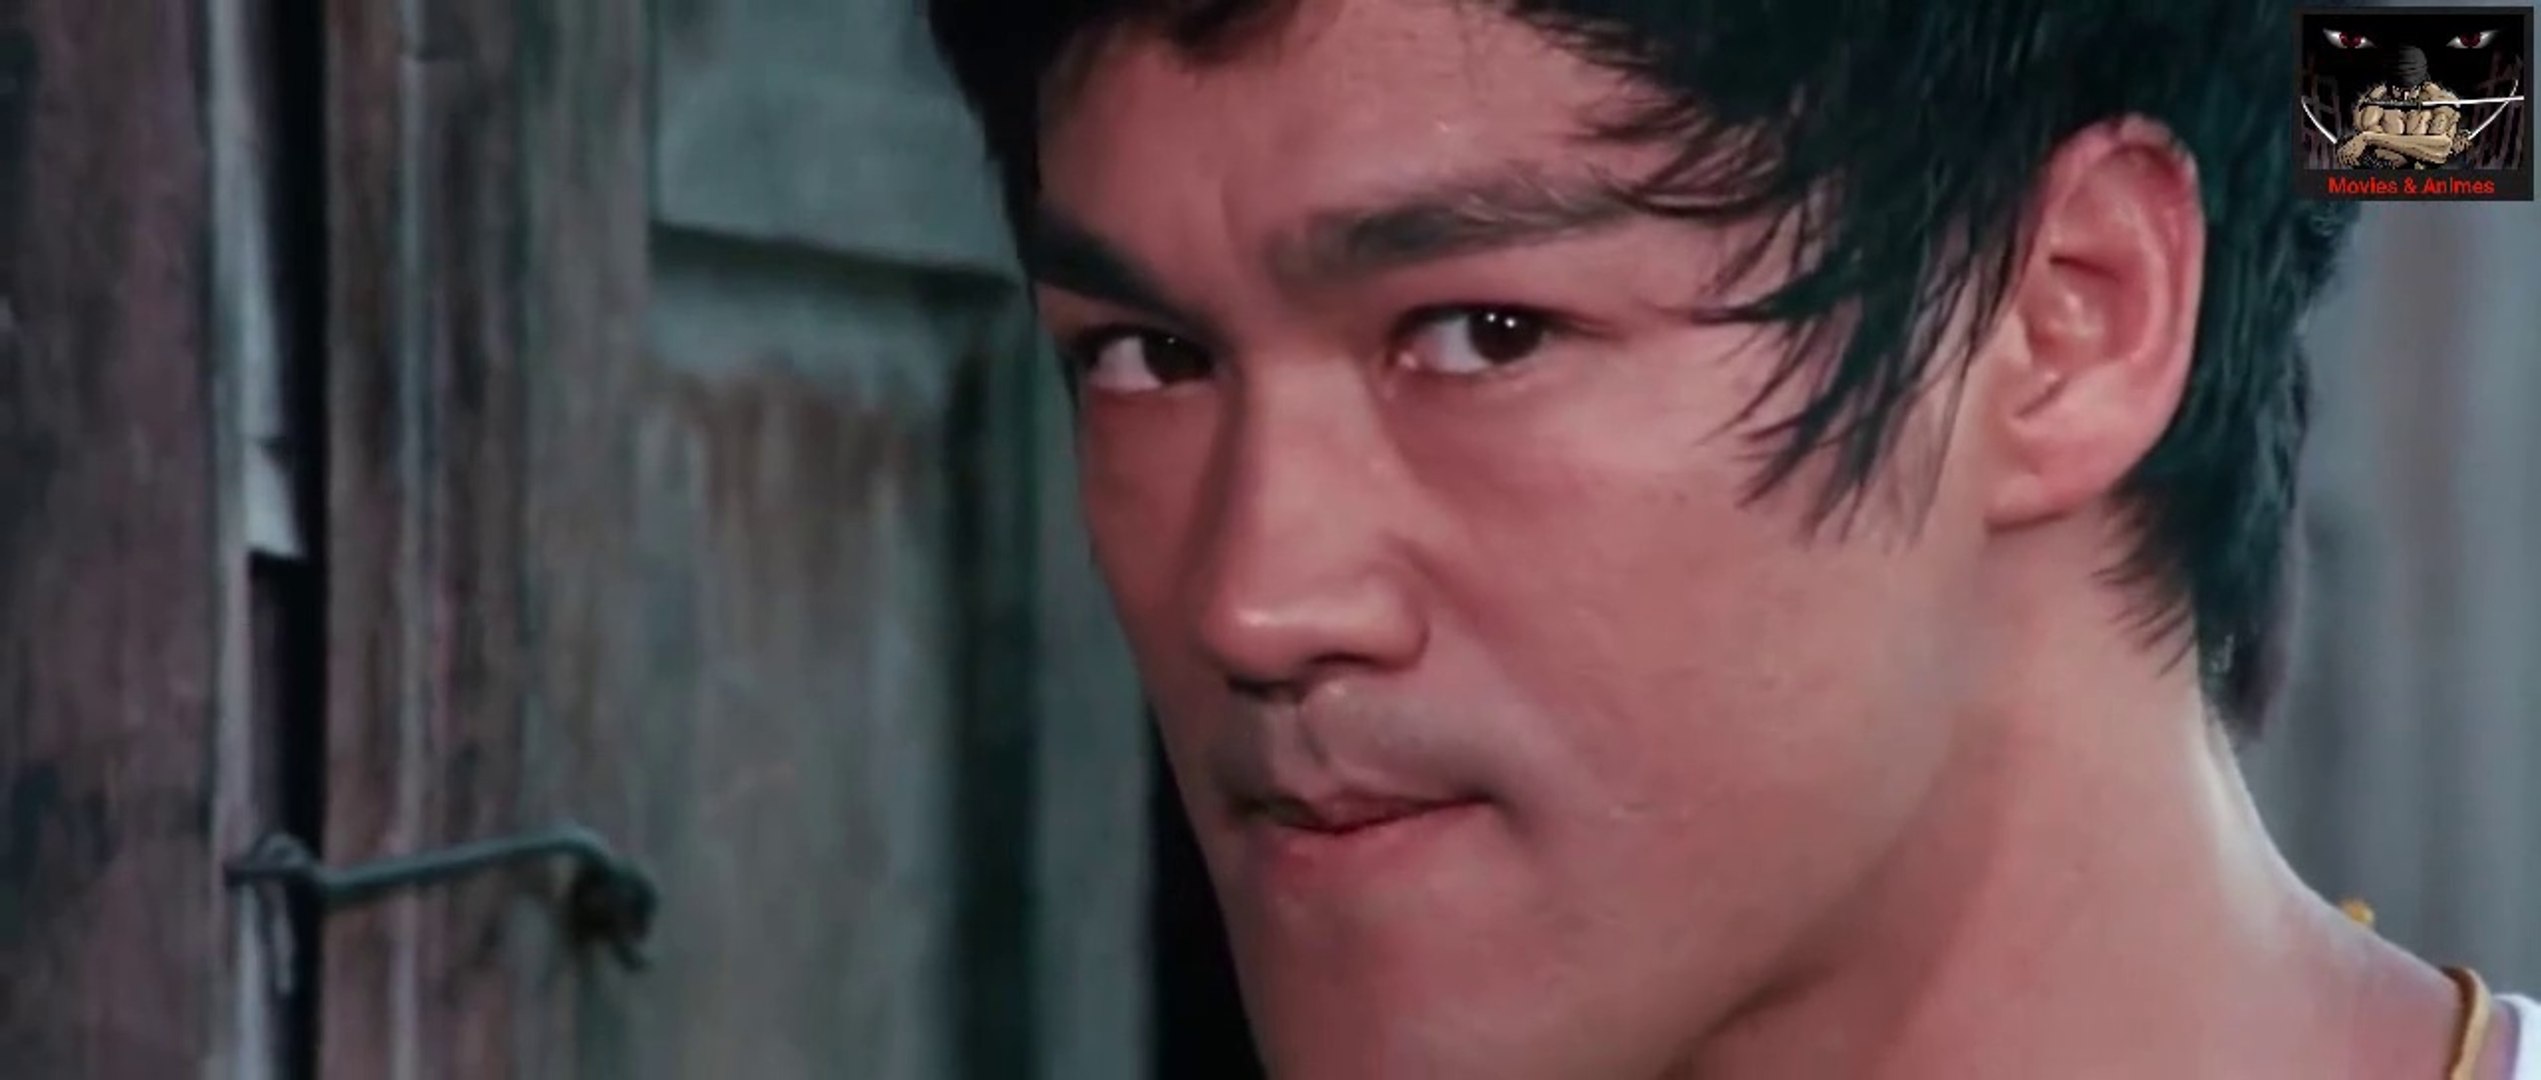 Bruce Lee The Big Boss 1971 Movie English Subtitle Part 1 of 2 - فيديو  Dailymotion